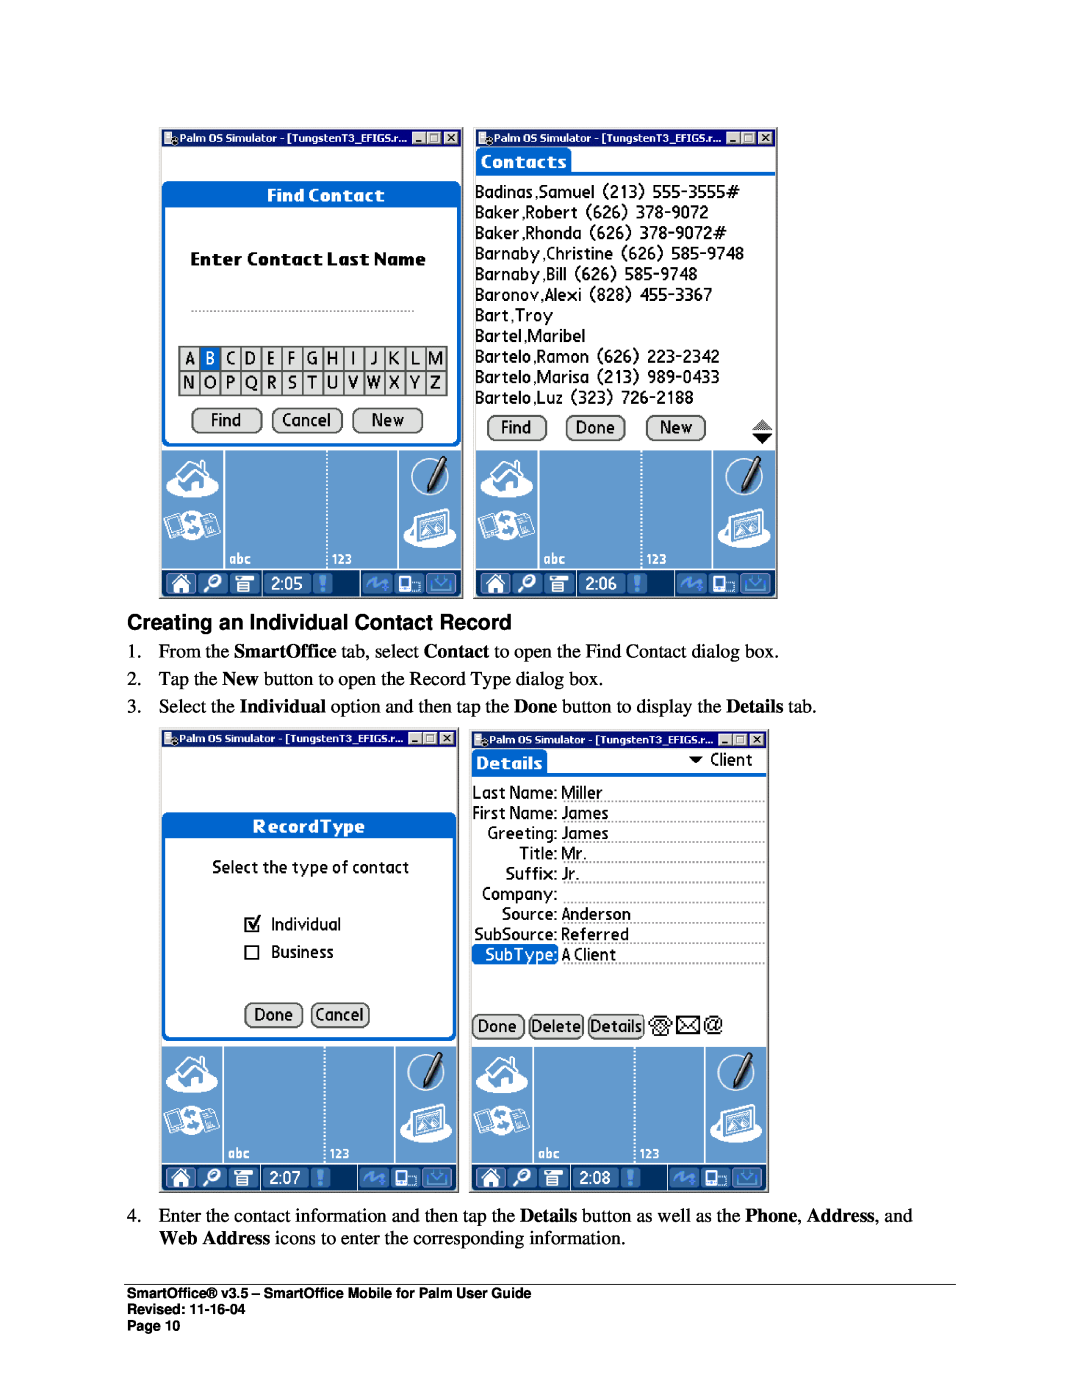 Palm SmartOffice Mobile manual Creating an Individual Contact Record 